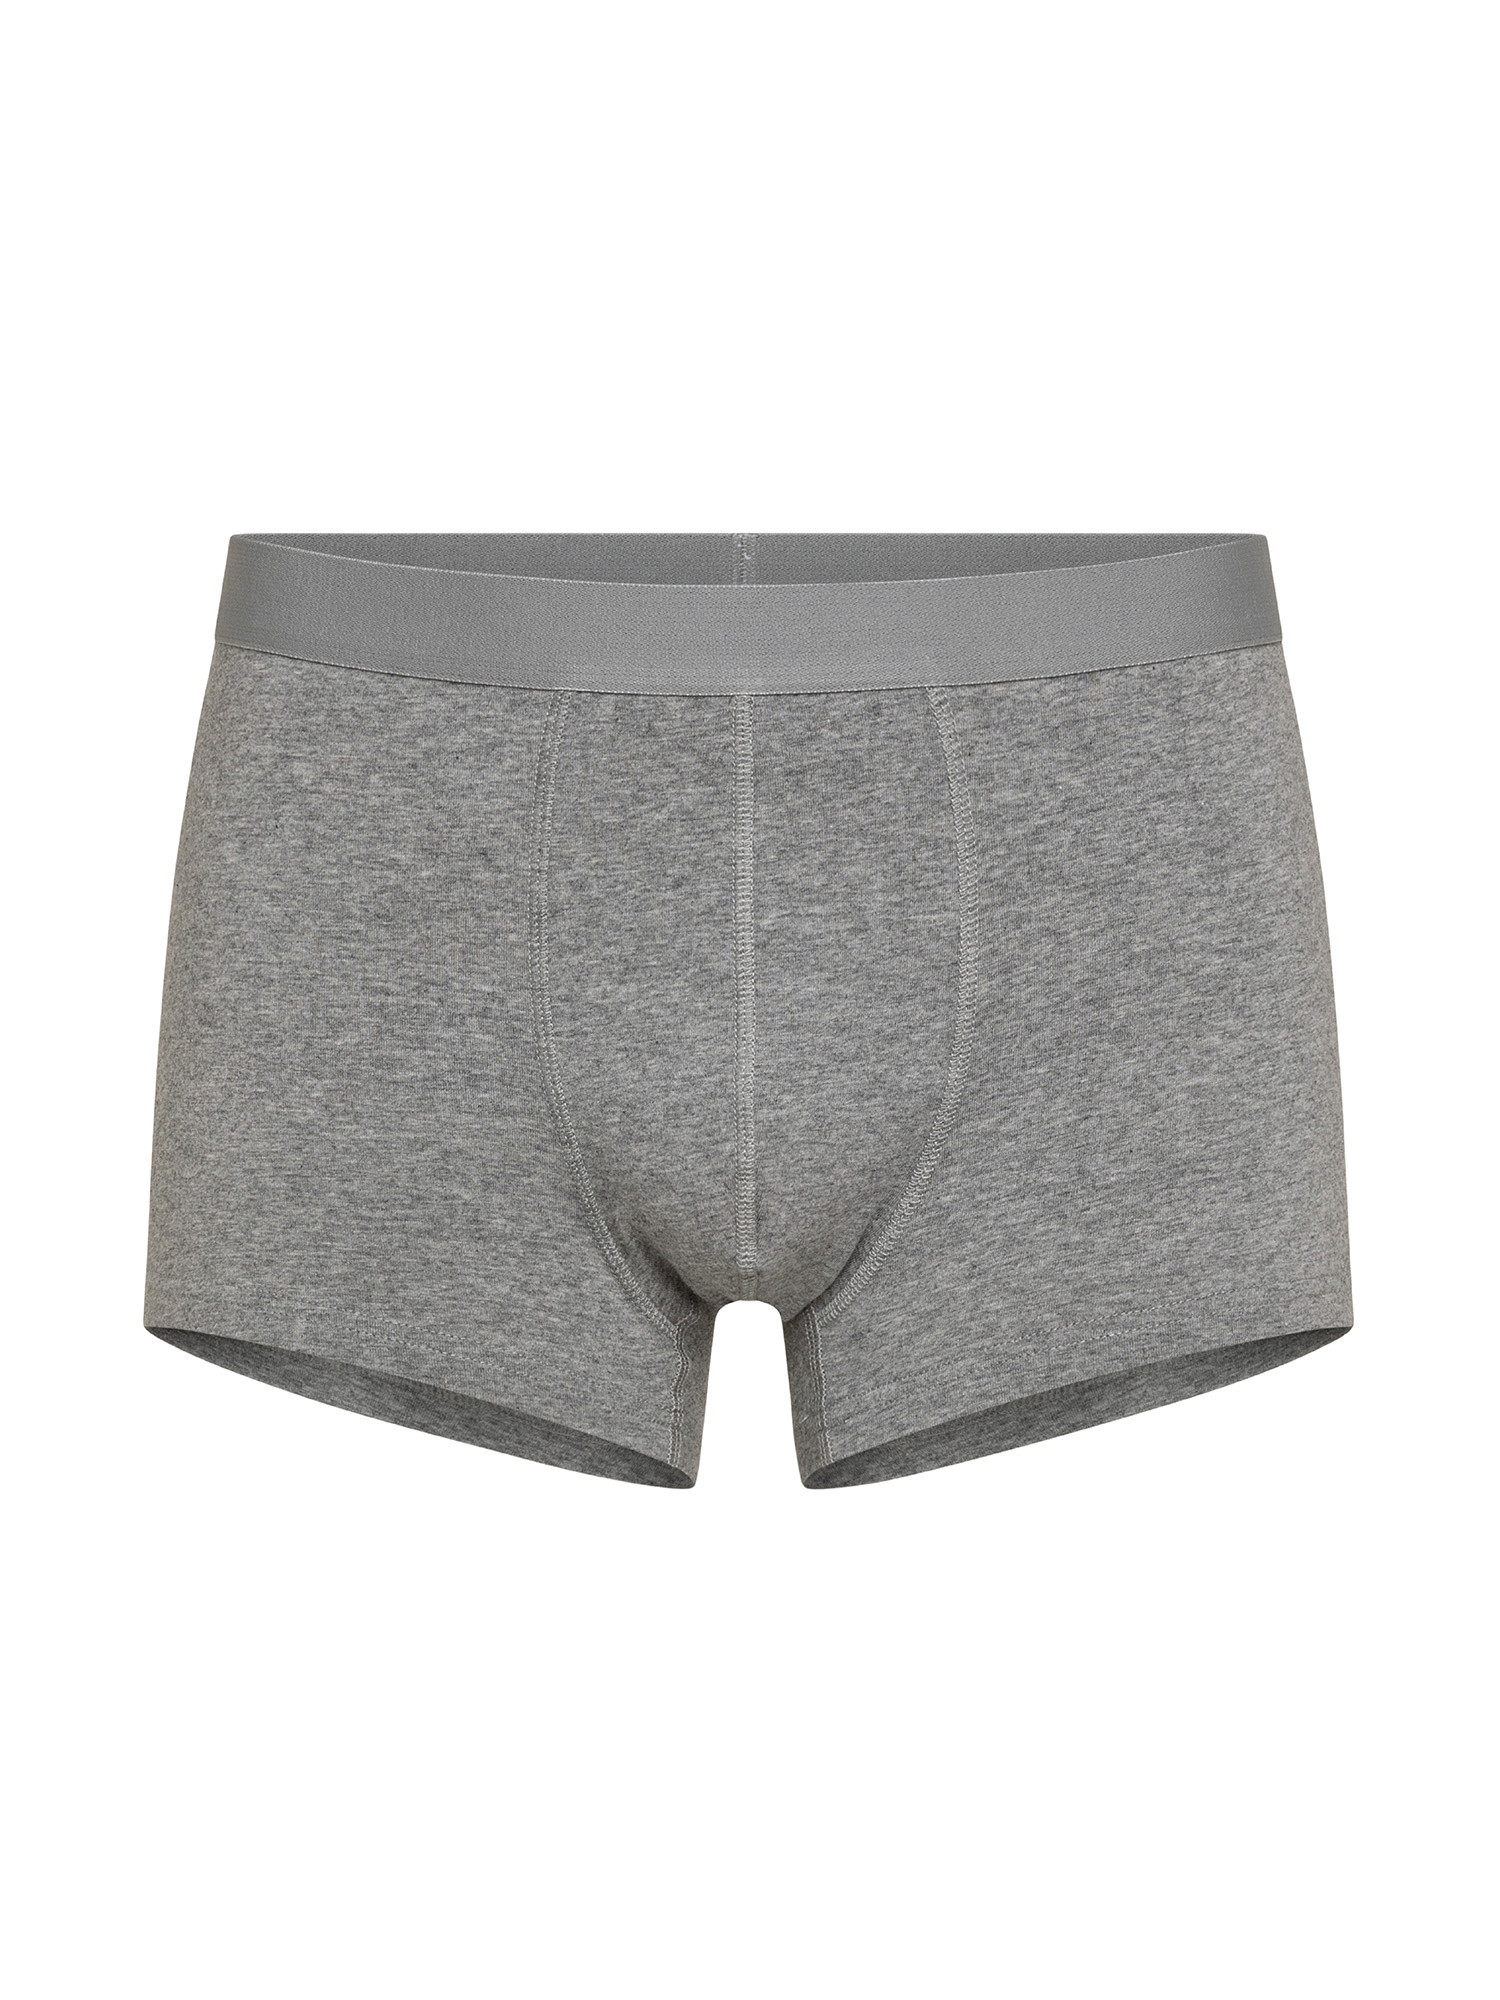 Luca D'Altieri - Set of 3 solid color organic cotton boxers, Grey, large image number 0